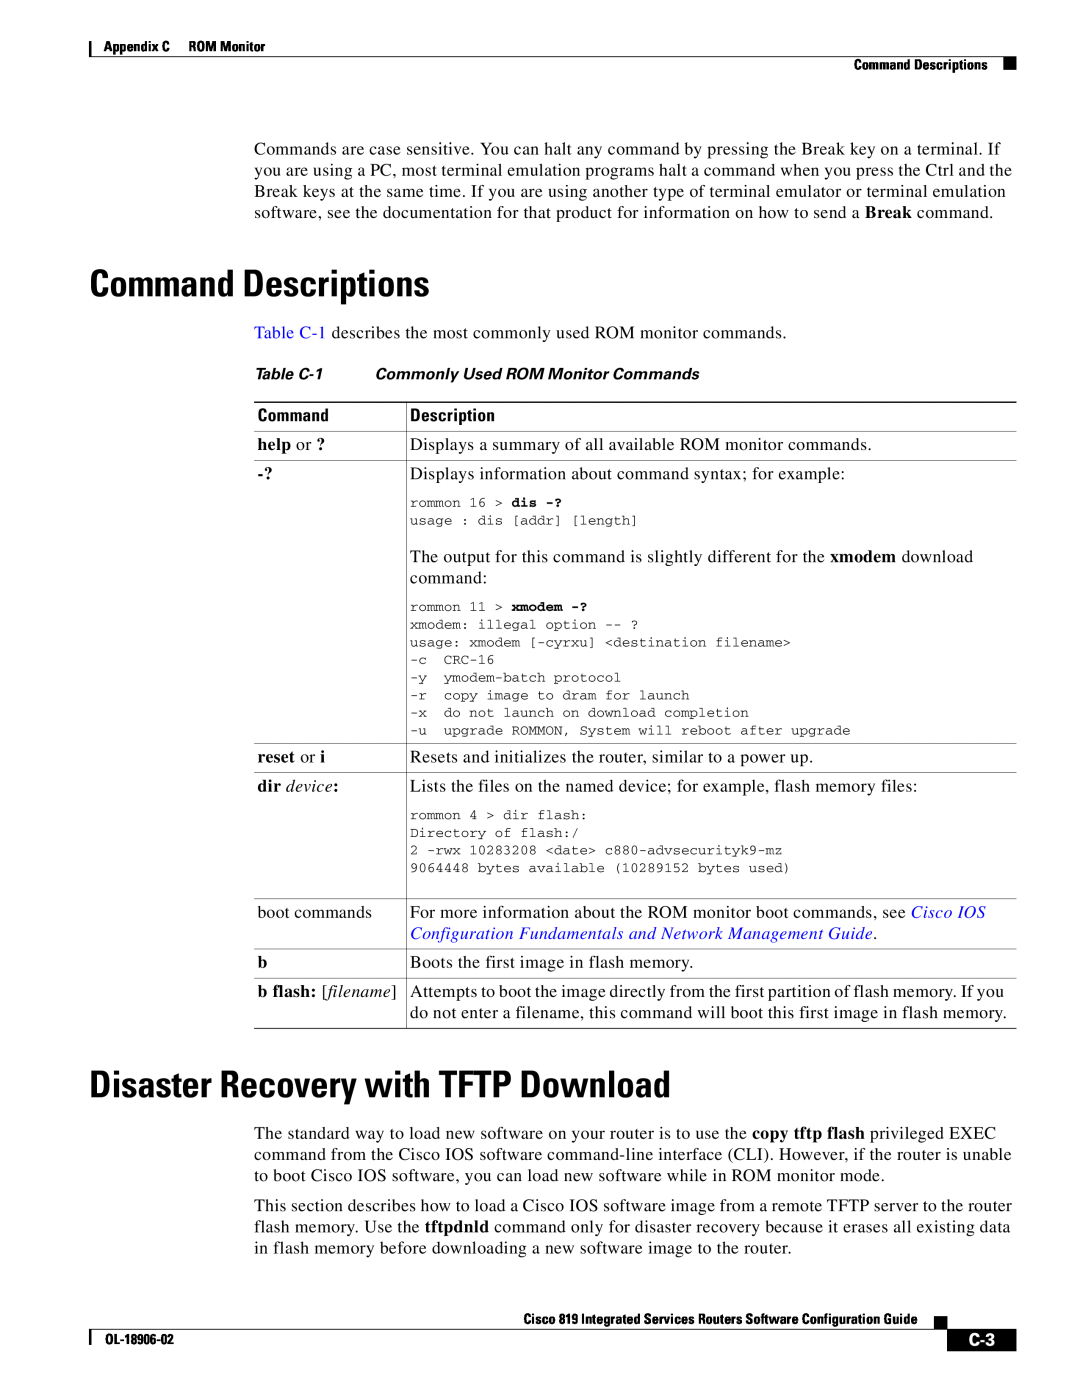 Cisco Systems C819HG4GVK9 Command Descriptions, Disaster Recovery with TFTP Download, help or ?, reset or, dir device 